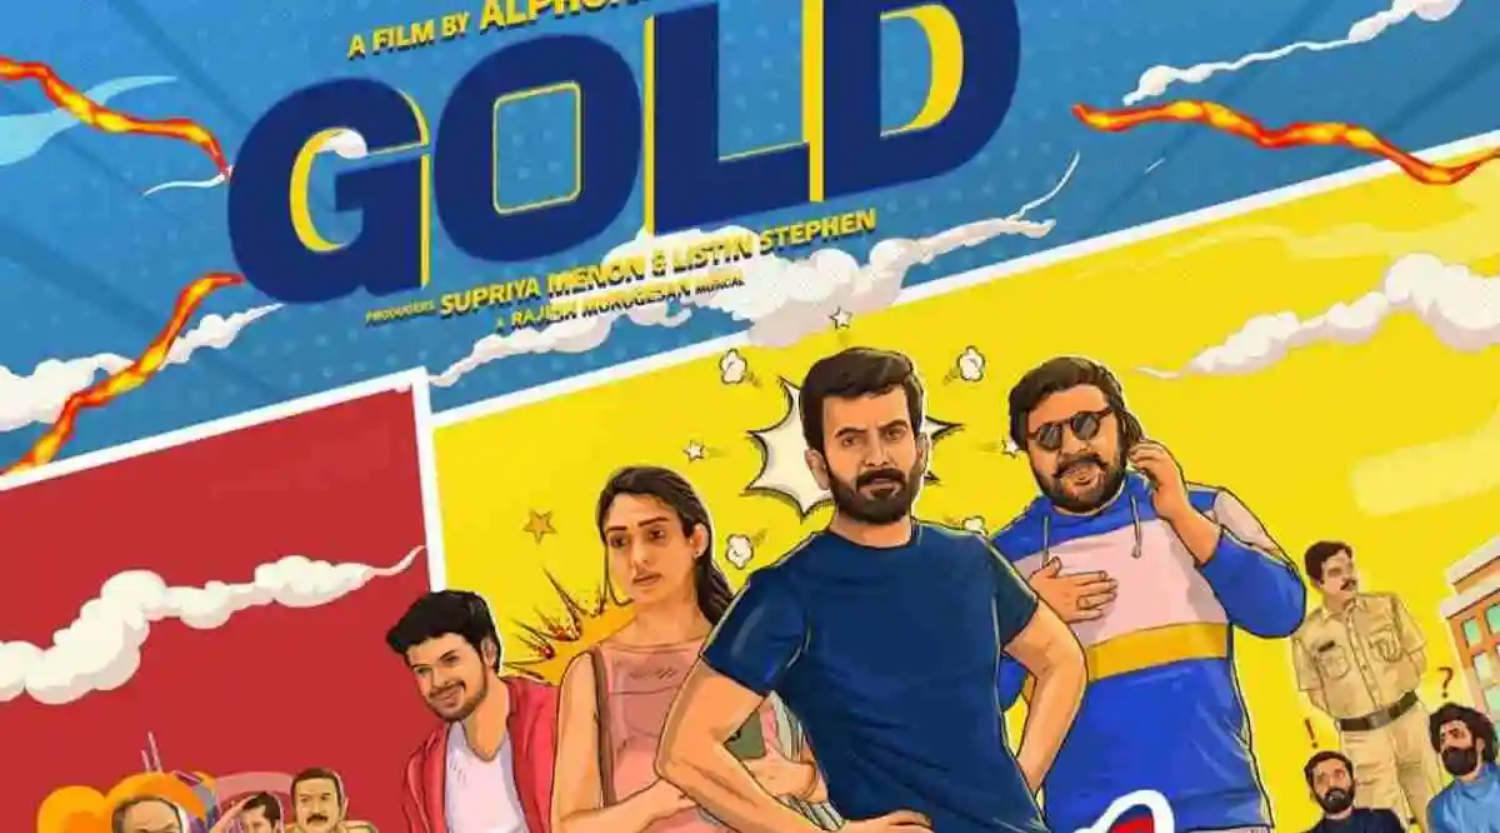 Prithviraj confirms the arrival of Gold in cinemas this week